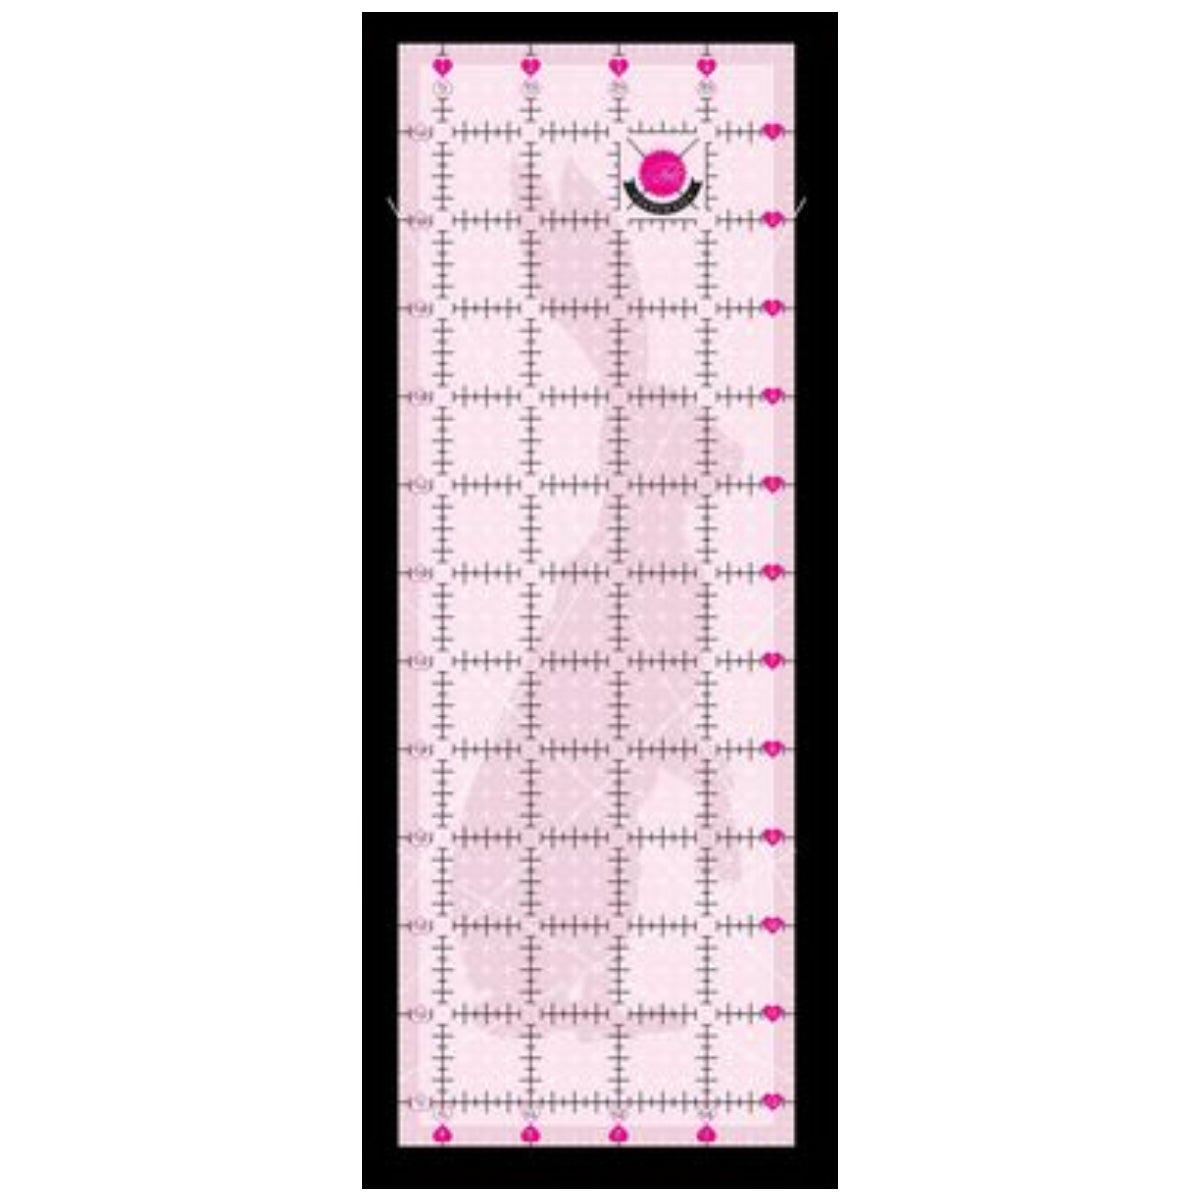 Tula Pink 4.5in x 12.5in Rabbit Cutting Ruler is a US made ruler that features: nonslip coating, fuzzy cut and angle markings, 1/4in margins all around, two color markings with fine marking lines for accurate cutting, and clear center squares for accuracy.